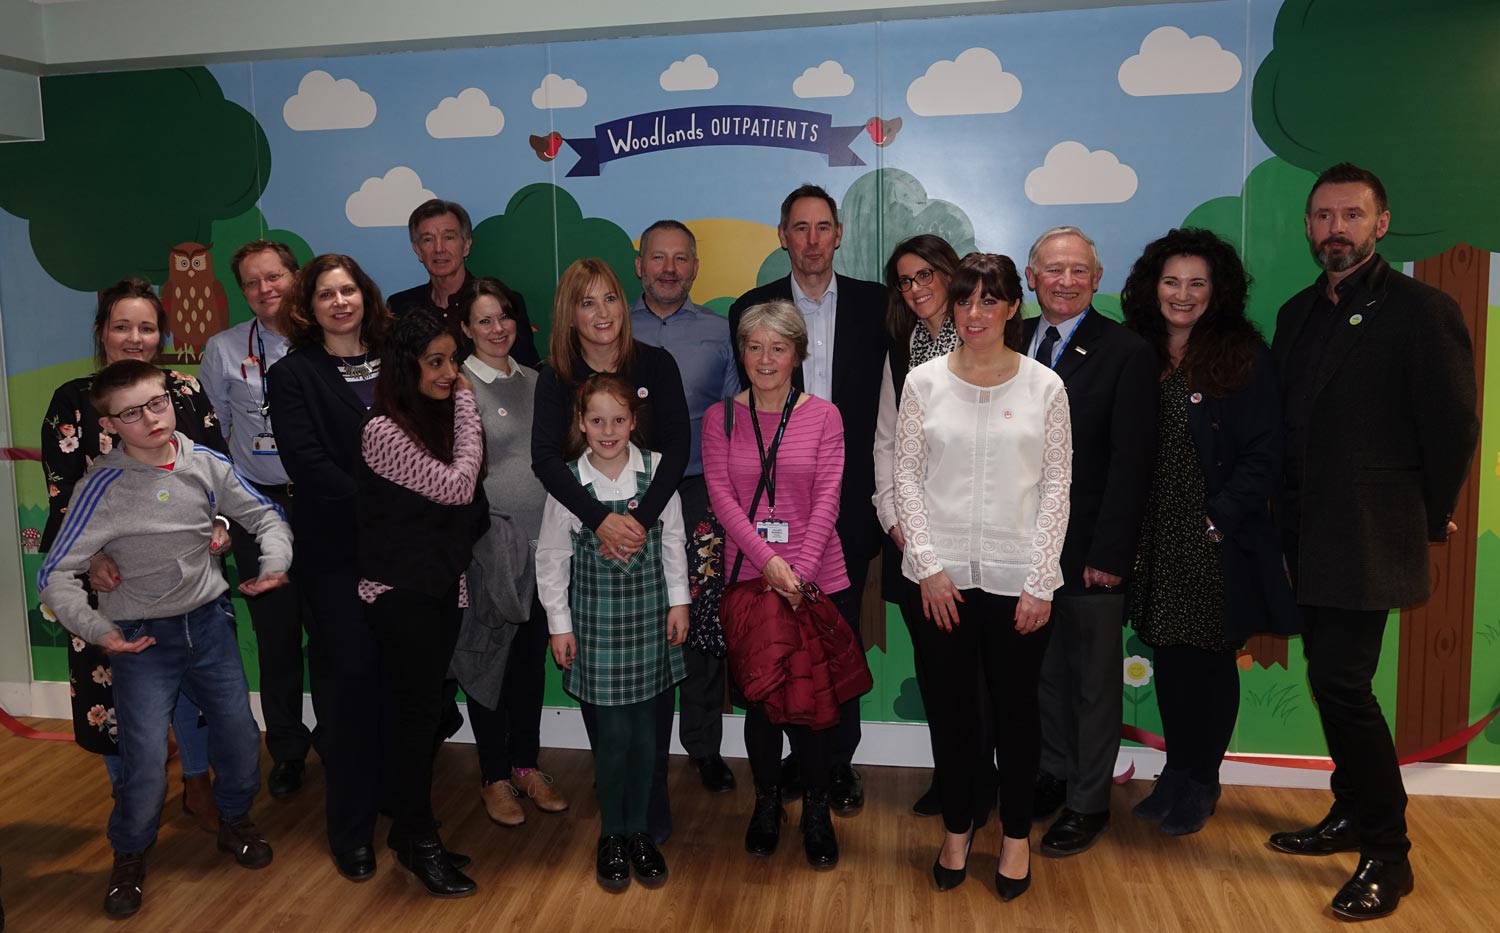 £75,000 makeover which will enable thousands more children to be treated at Harrogate District Hospital’s Paediatric Outpatient Department